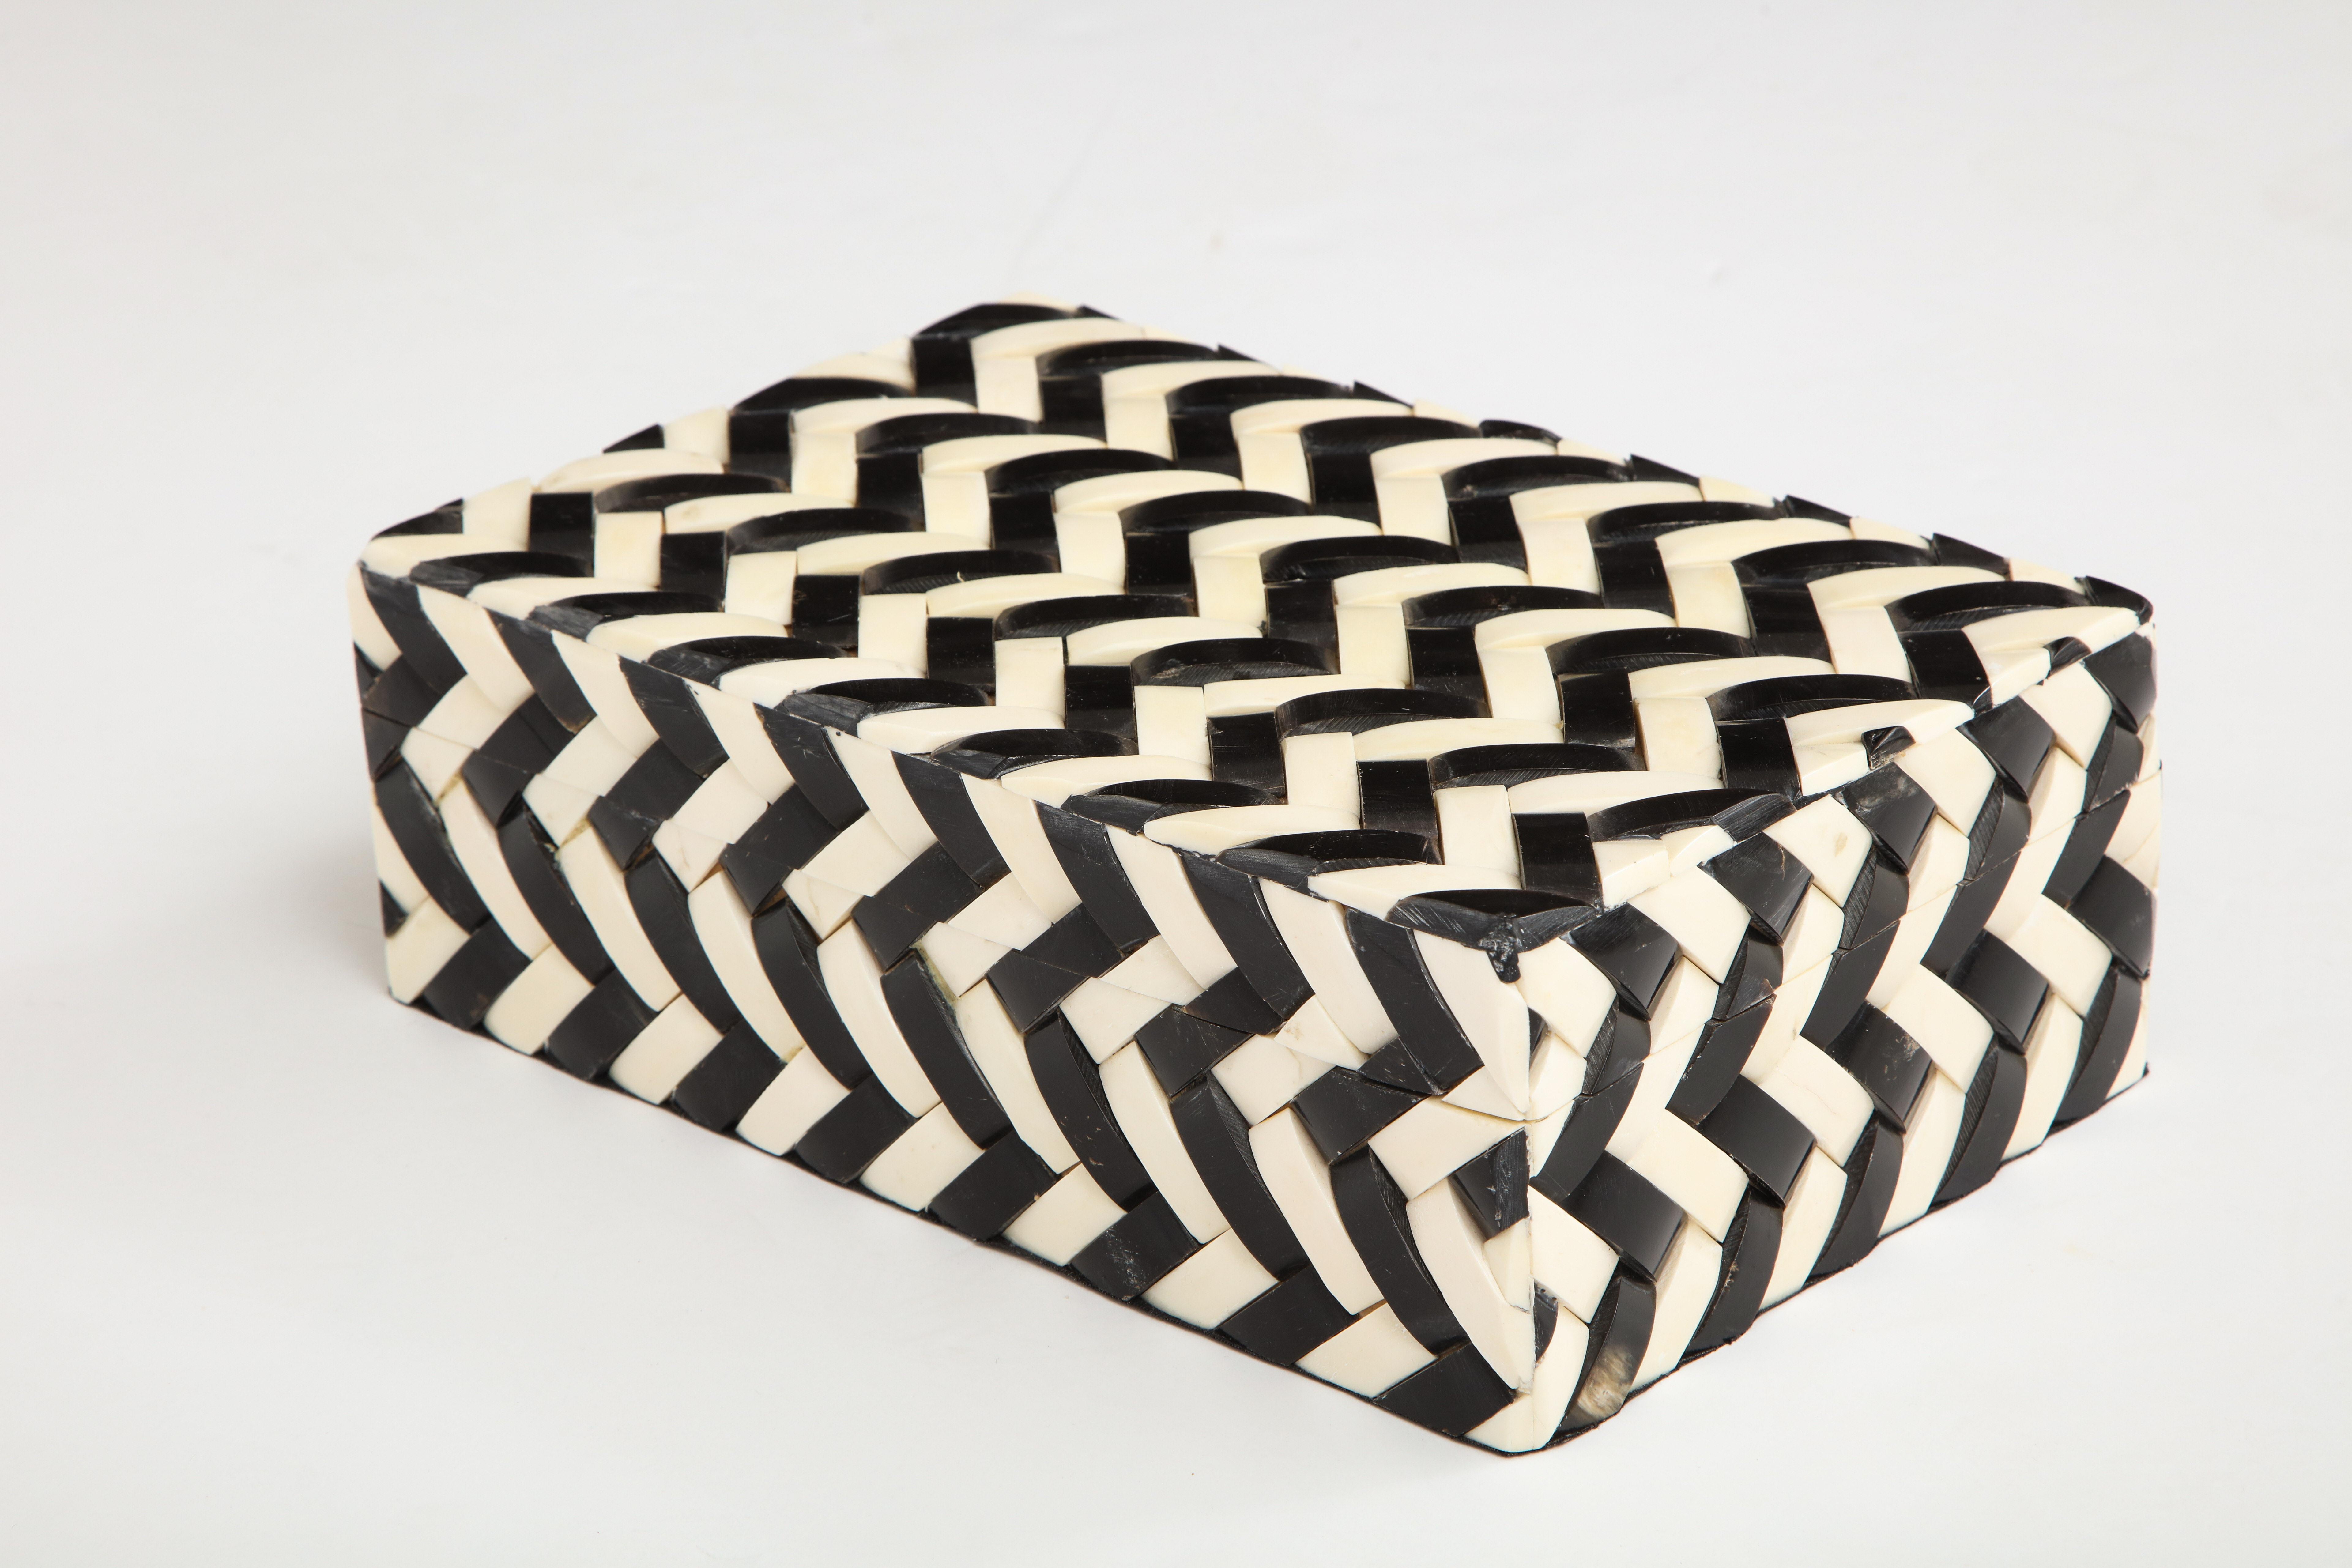 Eye-catching graphic cheveron patterned box made from black and natural bone tiles, lined in wood.